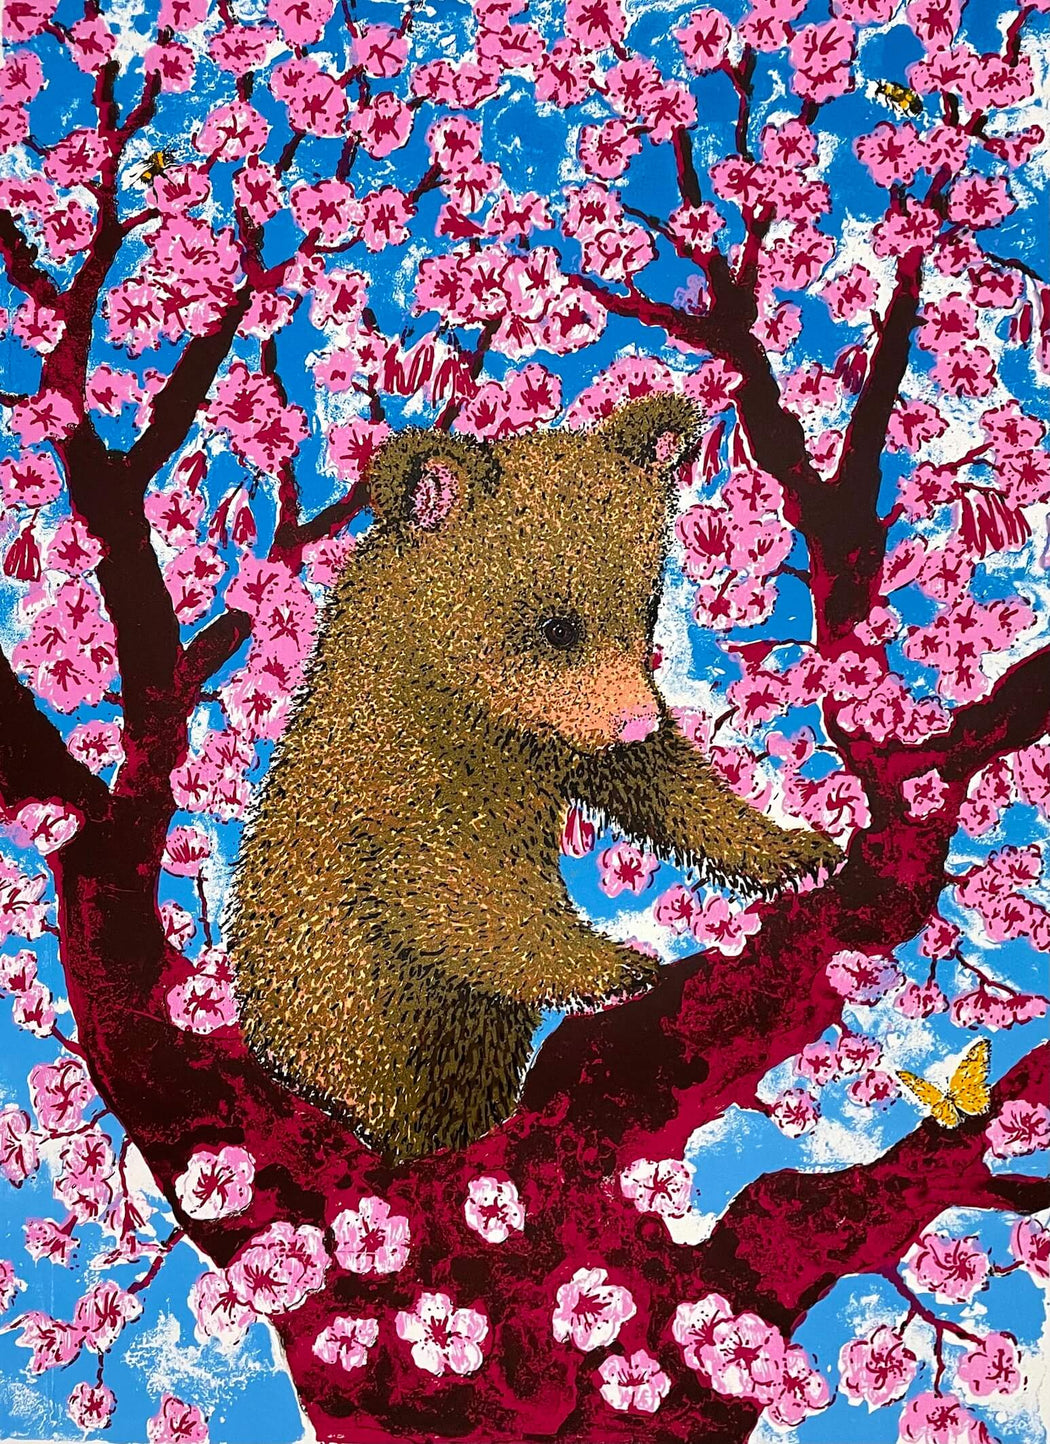 Cherry Blossom Bear by Tim Southall, a limited edition print of a bear on a pink blossom tree